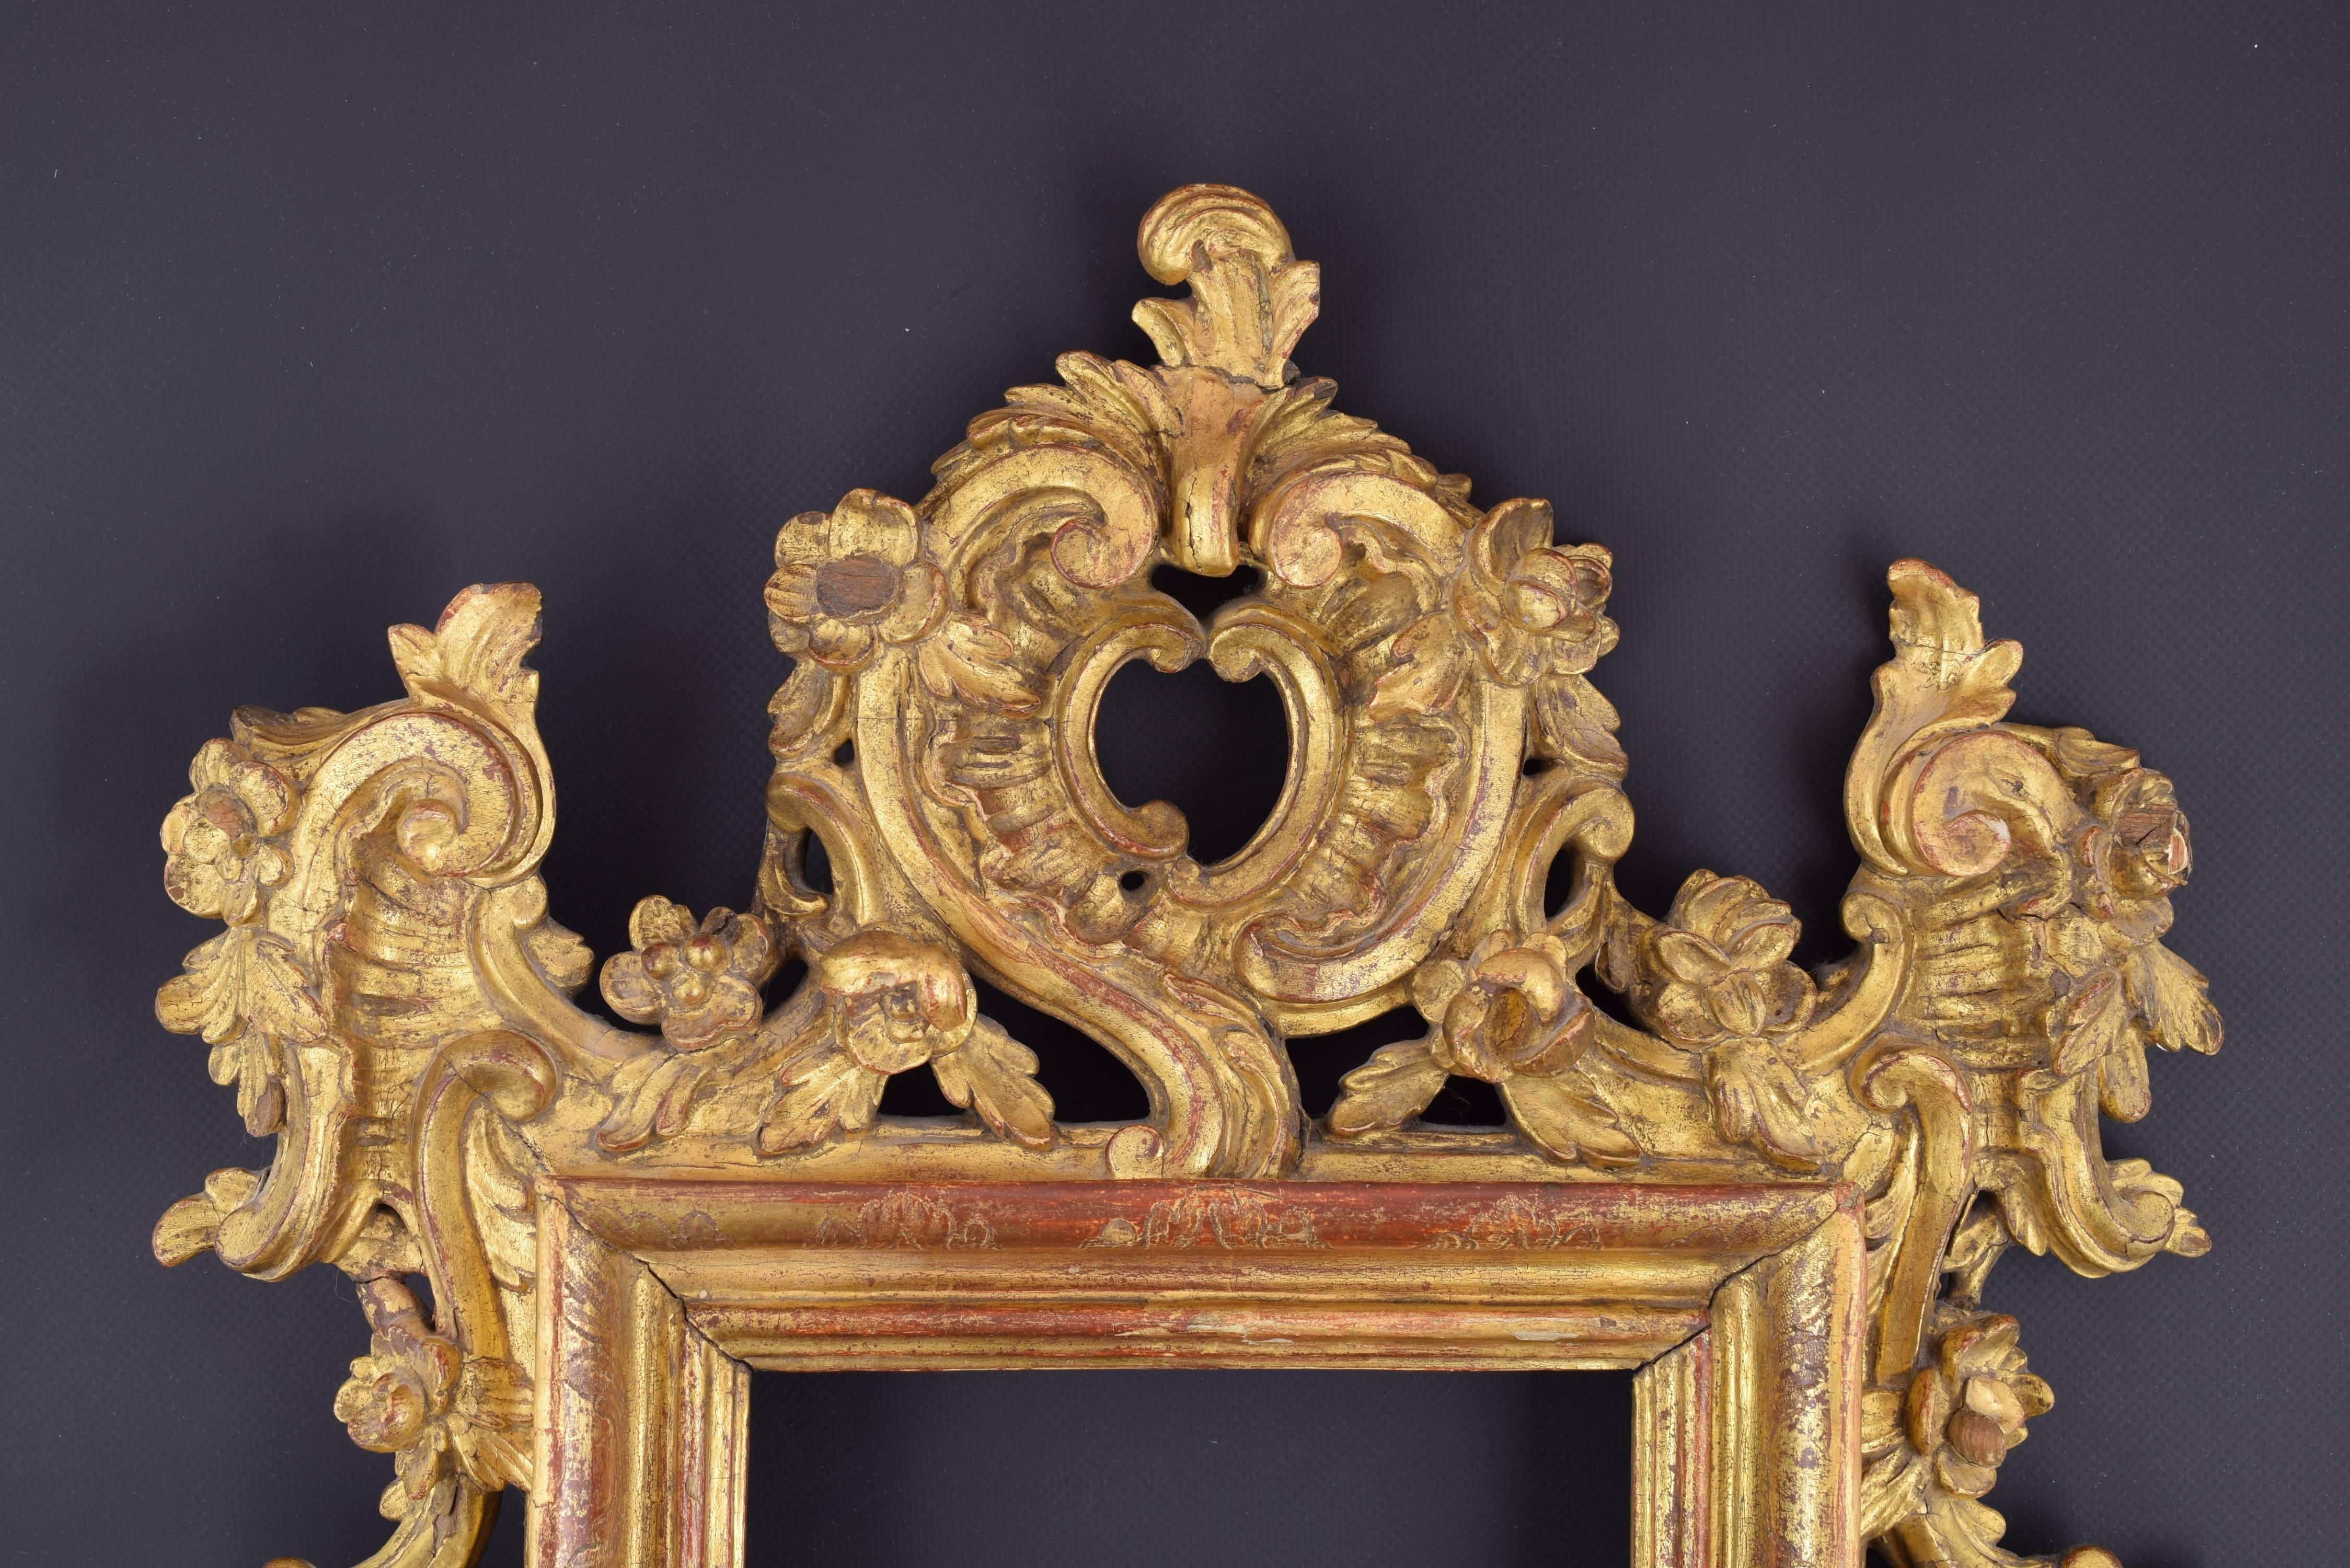 Rococo carved wood frame, 18th century.
Carved wood rectangular frame decorated with a symmetrical composition of “rocaille”, architectural elements and leaves, drawing curves, as is usual in Rococo art, with some small flowers. 
Nowadays, the